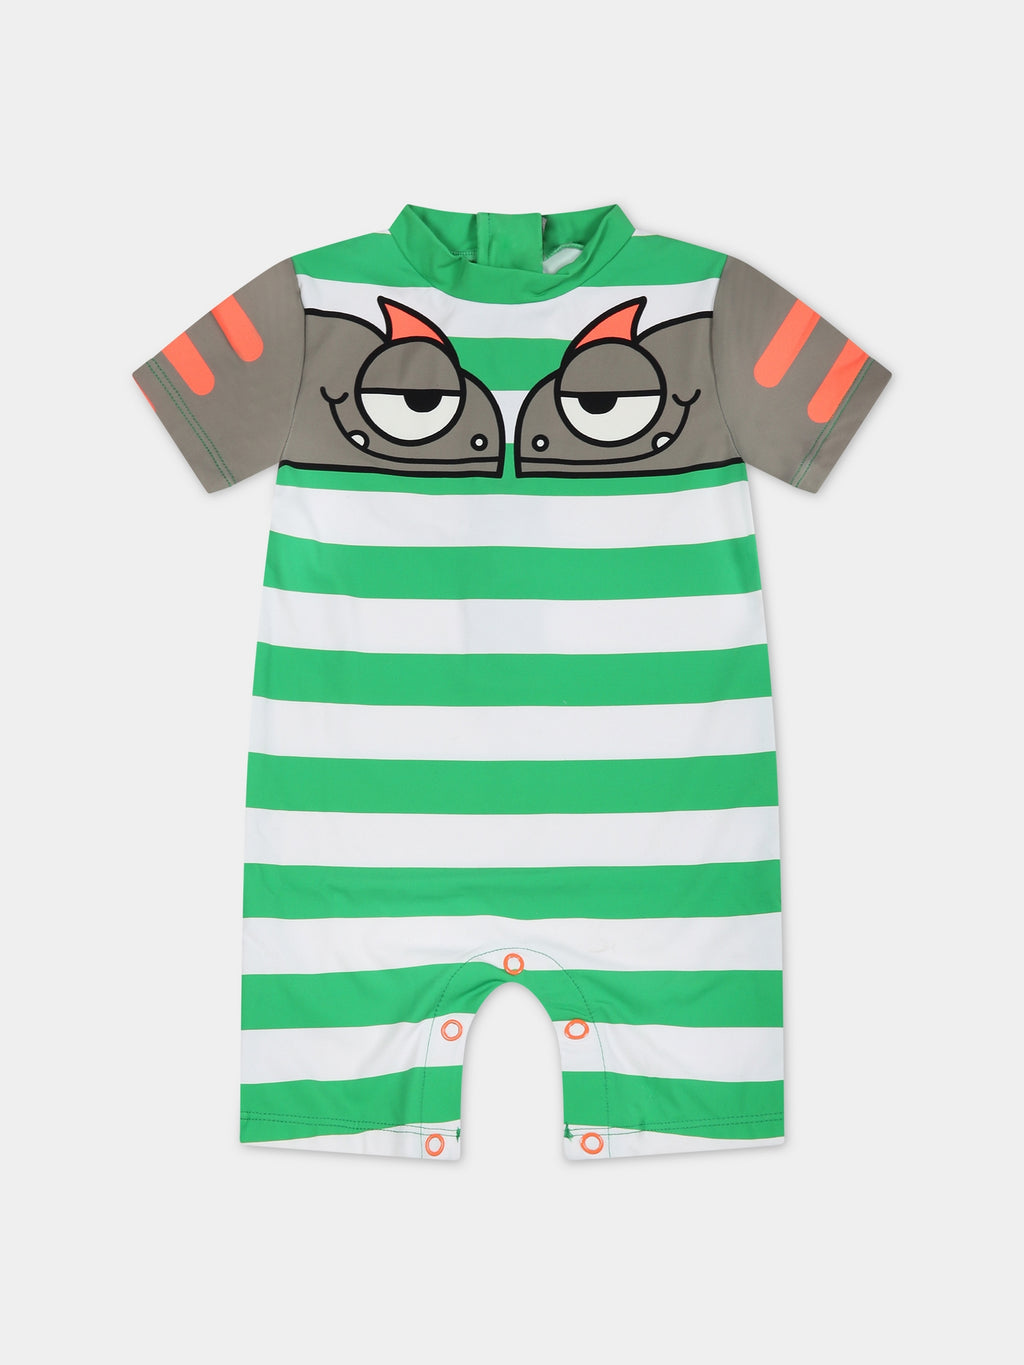 Multicolor romper for baby boy with gecko print